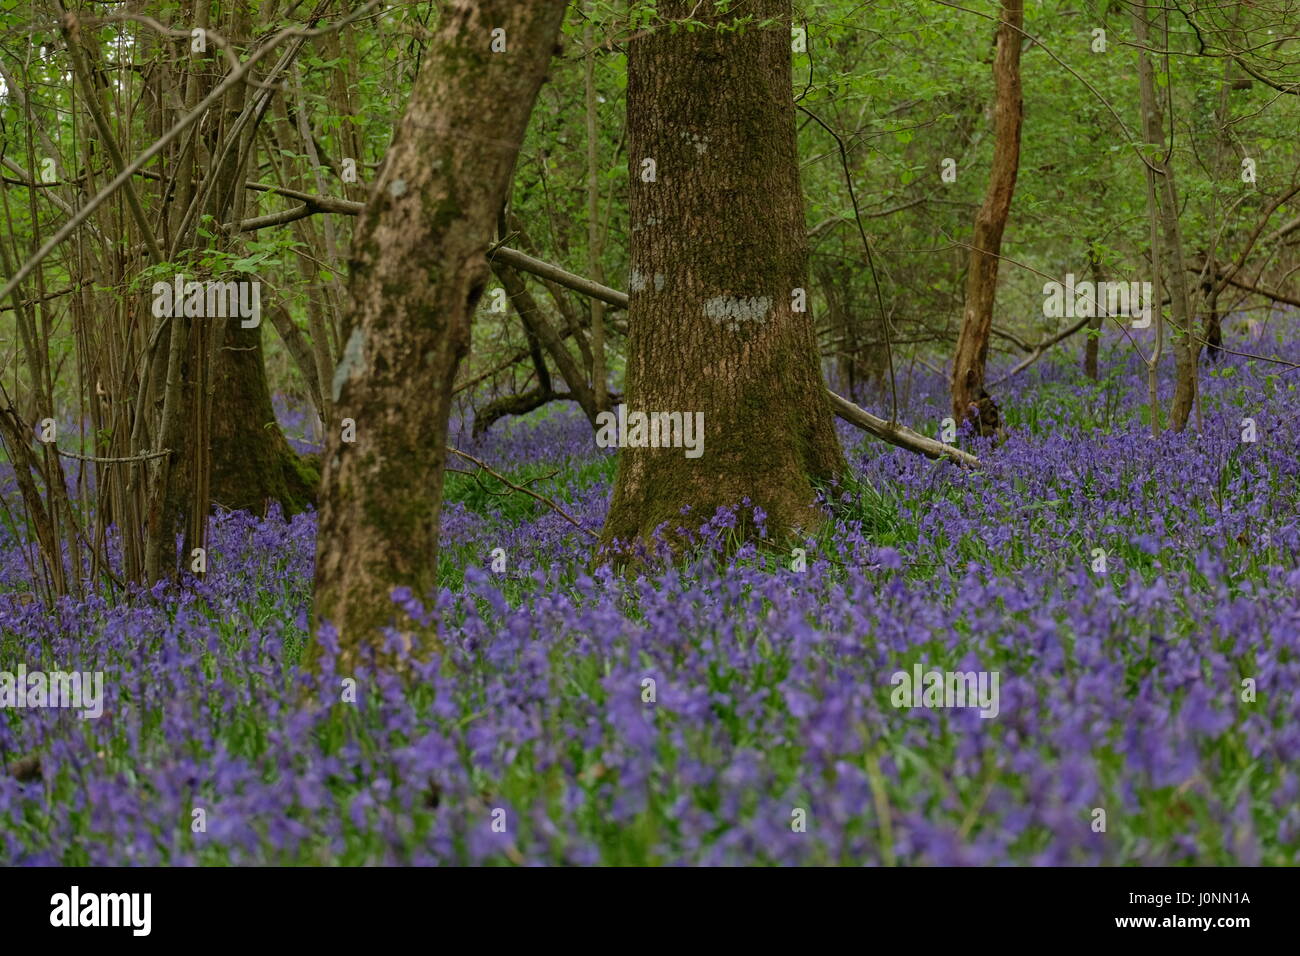 Bluebells in Duncliffe Woods, Dorset Stock Photo - Alamy